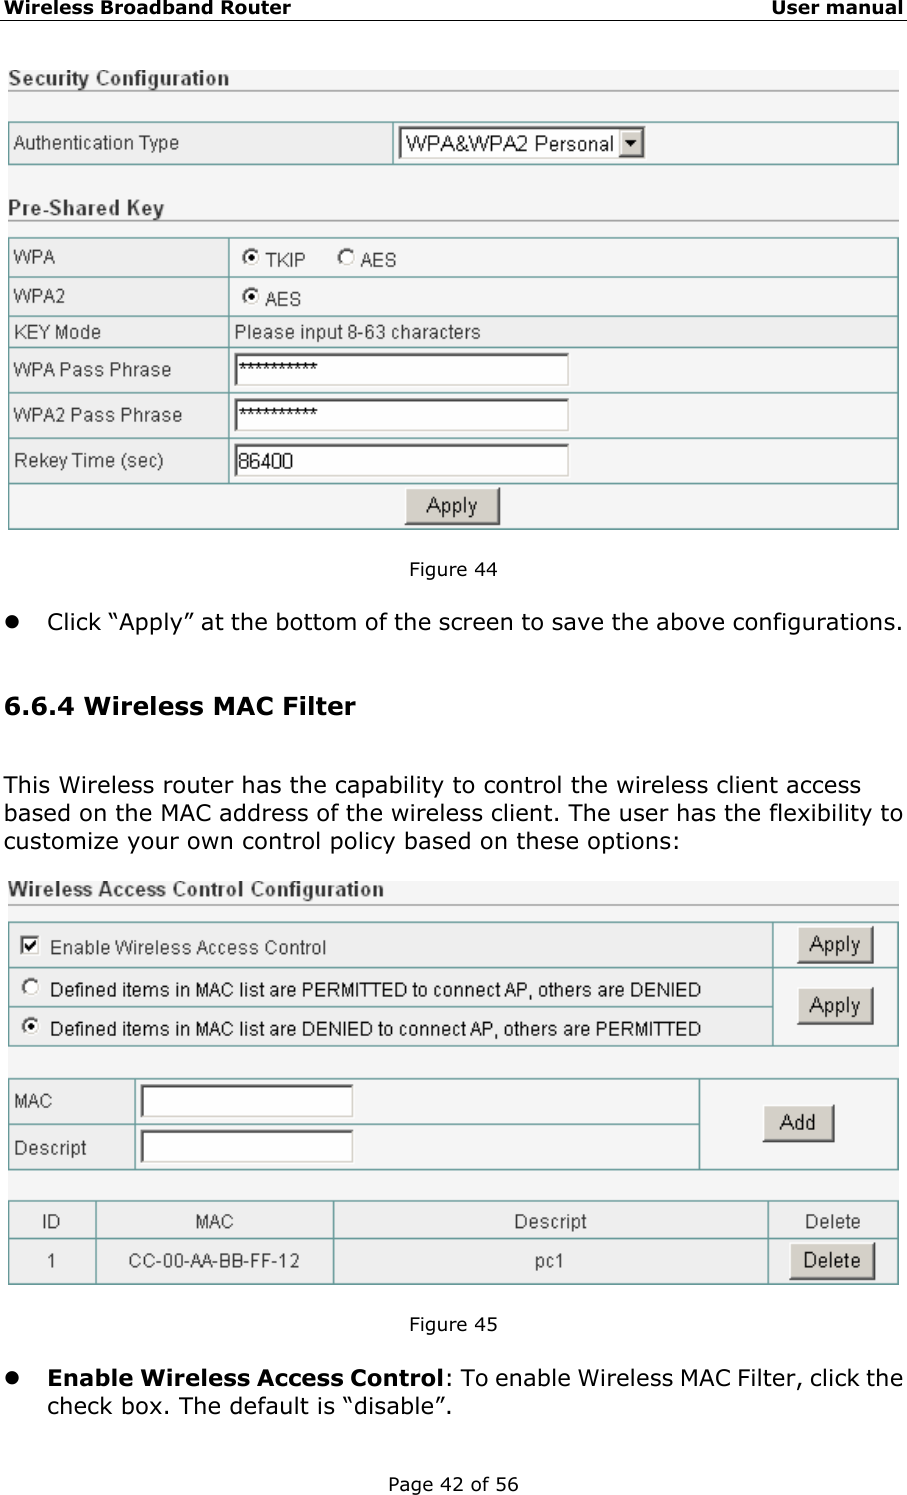 Wireless Broadband Router                                                   User manual Page 42 of 56   Figure 44  z Click “Apply” at the bottom of the screen to save the above configurations.  6.6.4 Wireless MAC Filter This Wireless router has the capability to control the wireless client access based on the MAC address of the wireless client. The user has the flexibility to customize your own control policy based on these options:    Figure 45  z Enable Wireless Access Control: To enable Wireless MAC Filter, click the check box. The default is “disable”. 